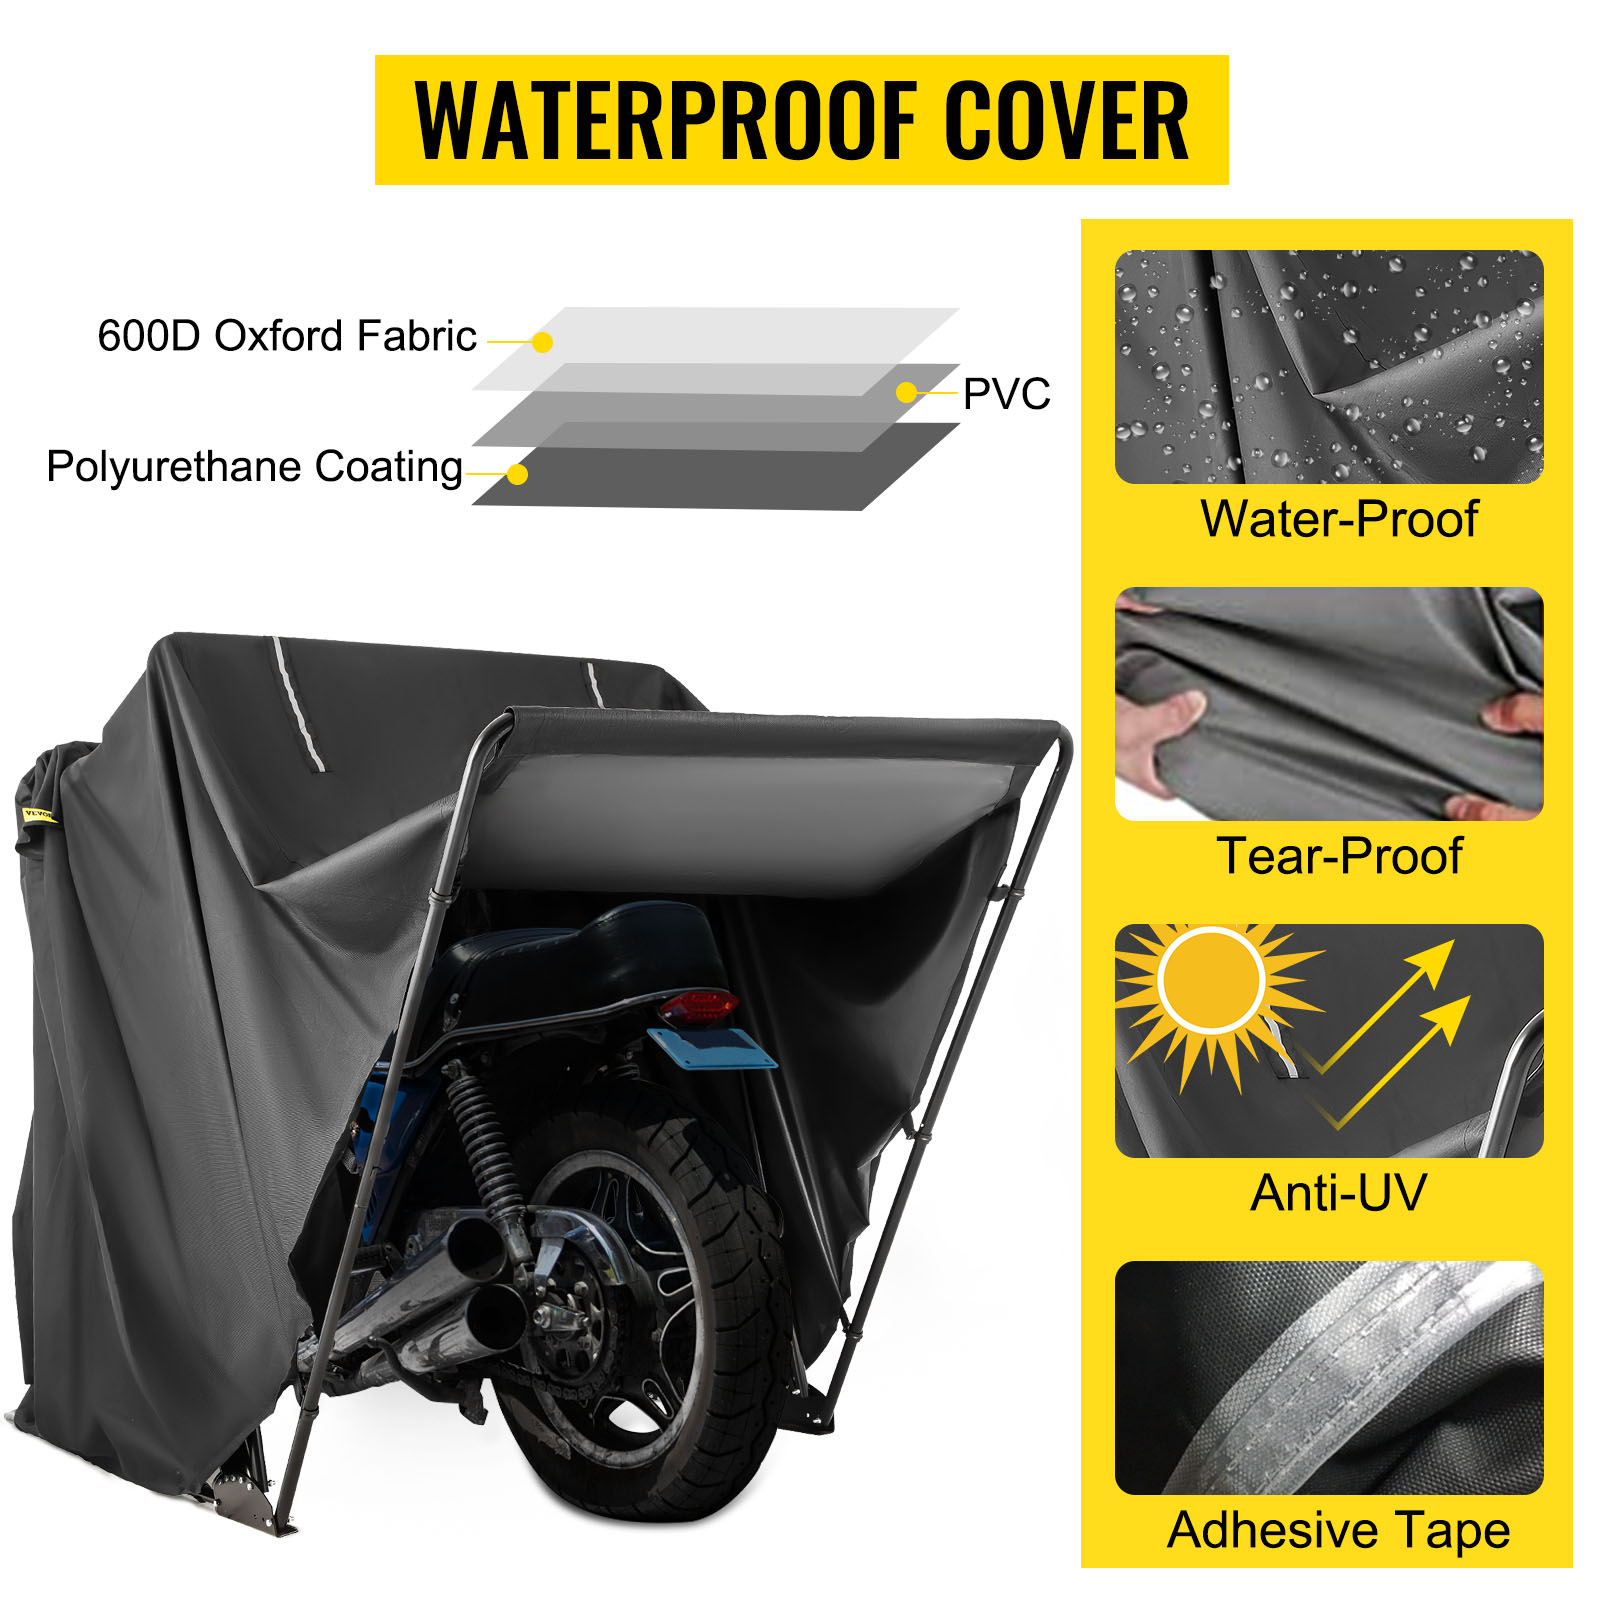 Heavy Duty Large Motorcycle Shelter Shed Cover Storage Tent Strong